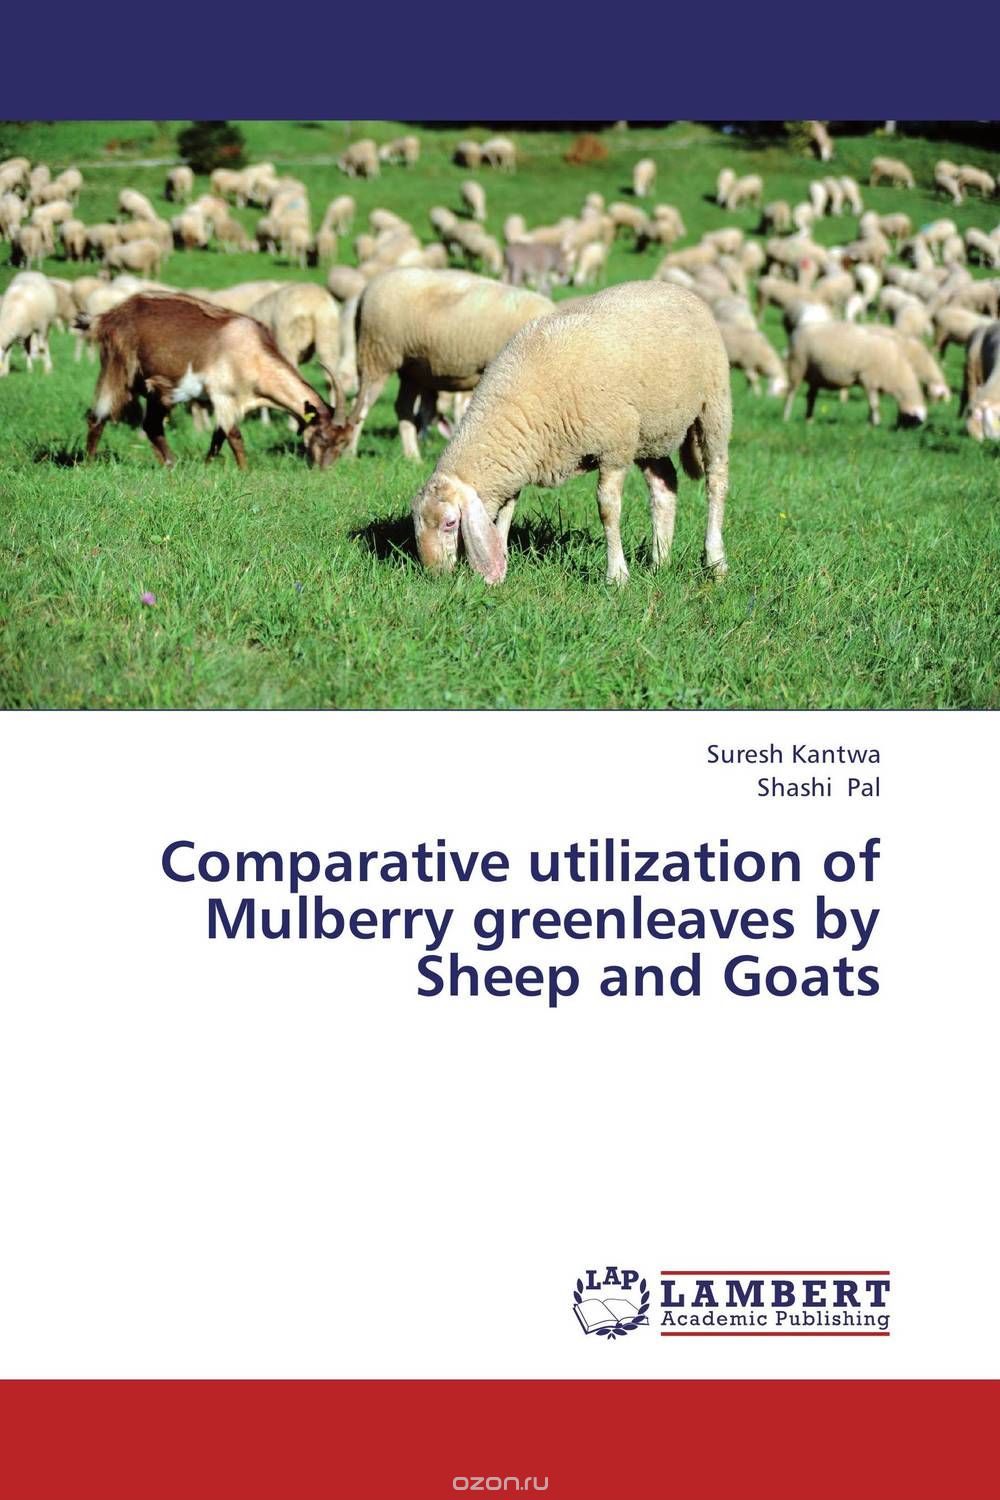 Скачать книгу "Comparative utilization of Mulberry greenleaves by Sheep and Goats"